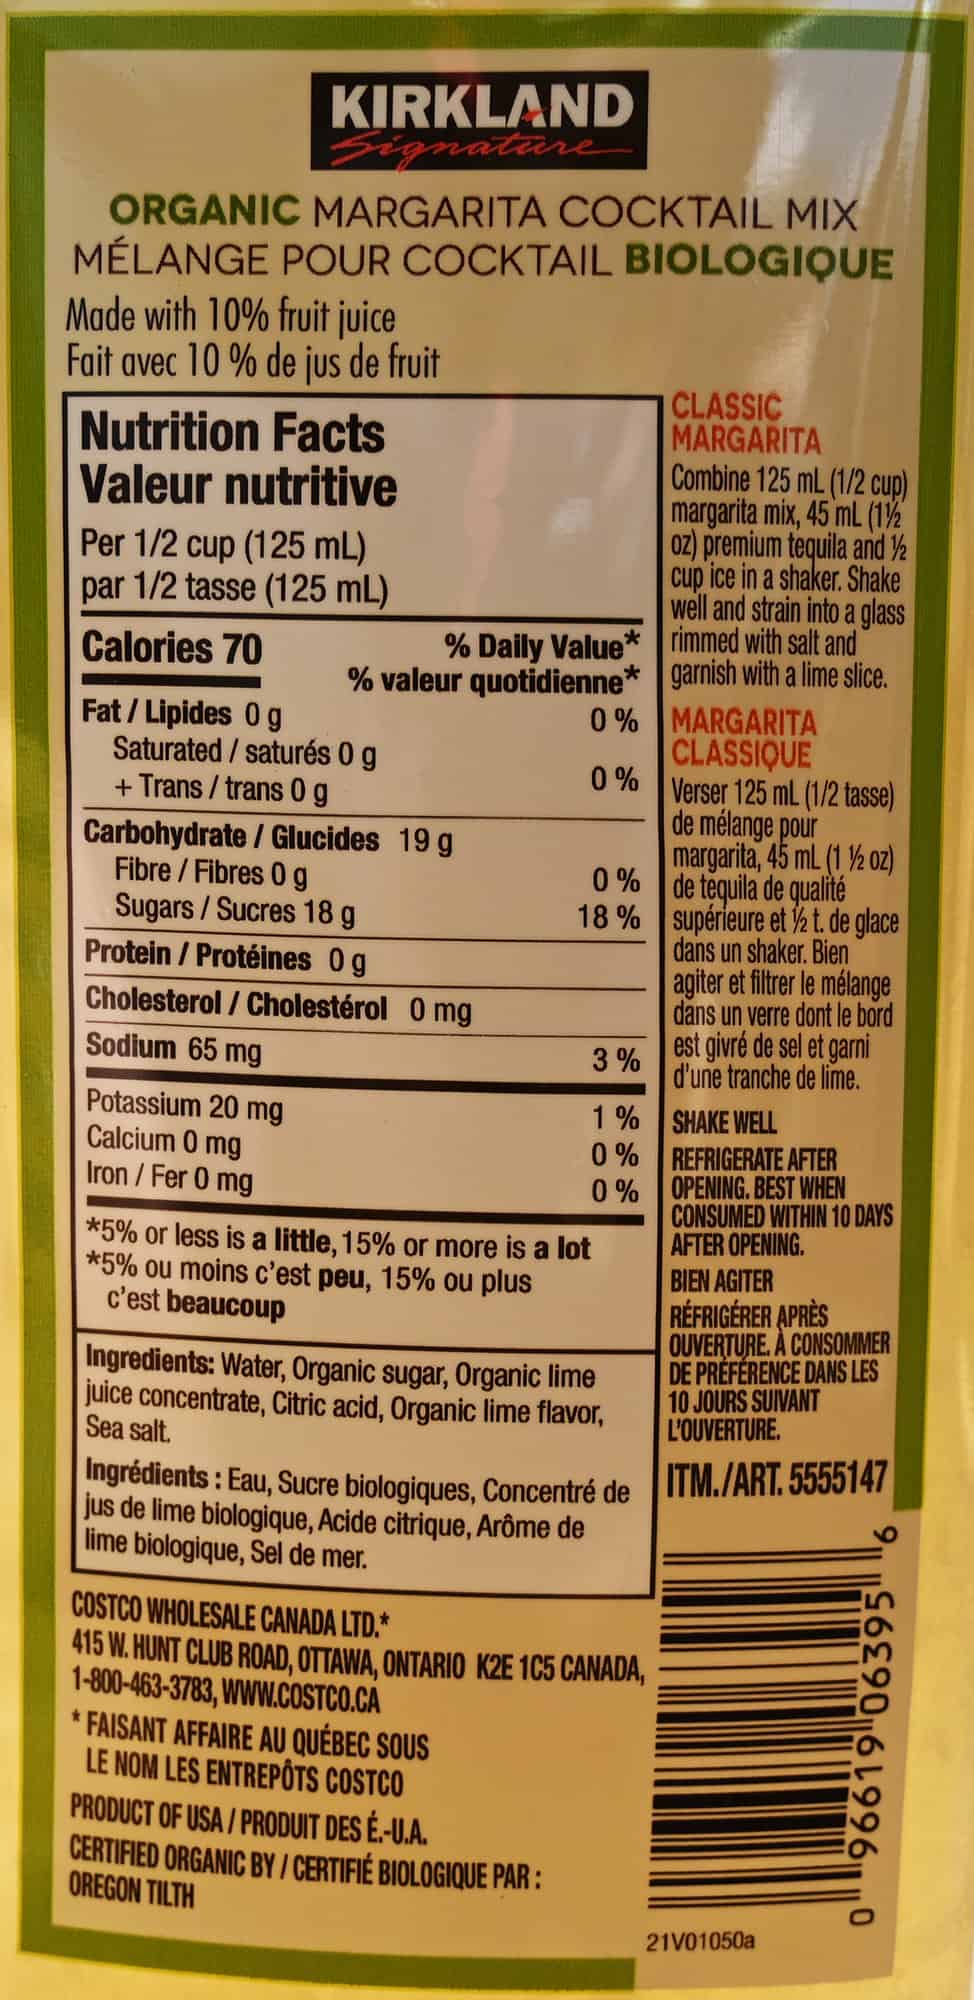 Image of the back label of the organic margarita mix showing the mix should be consumed within ten days of opening and stored in the refrigerator,